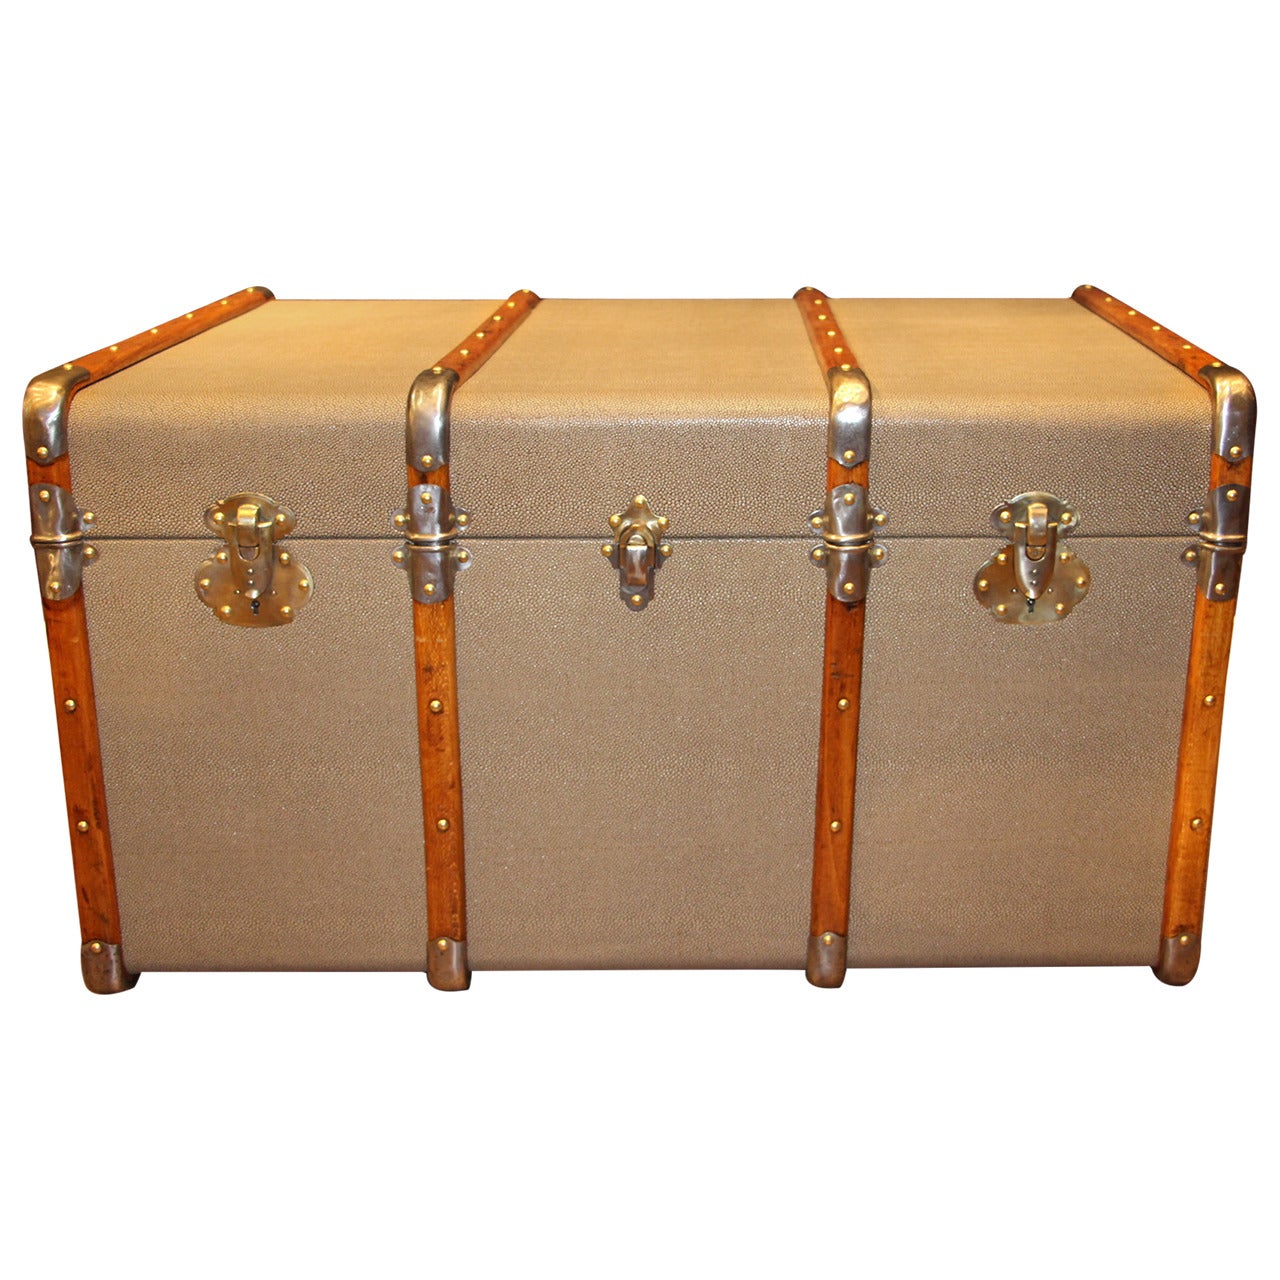 1930s French Faux Galucha Steamer Trunk